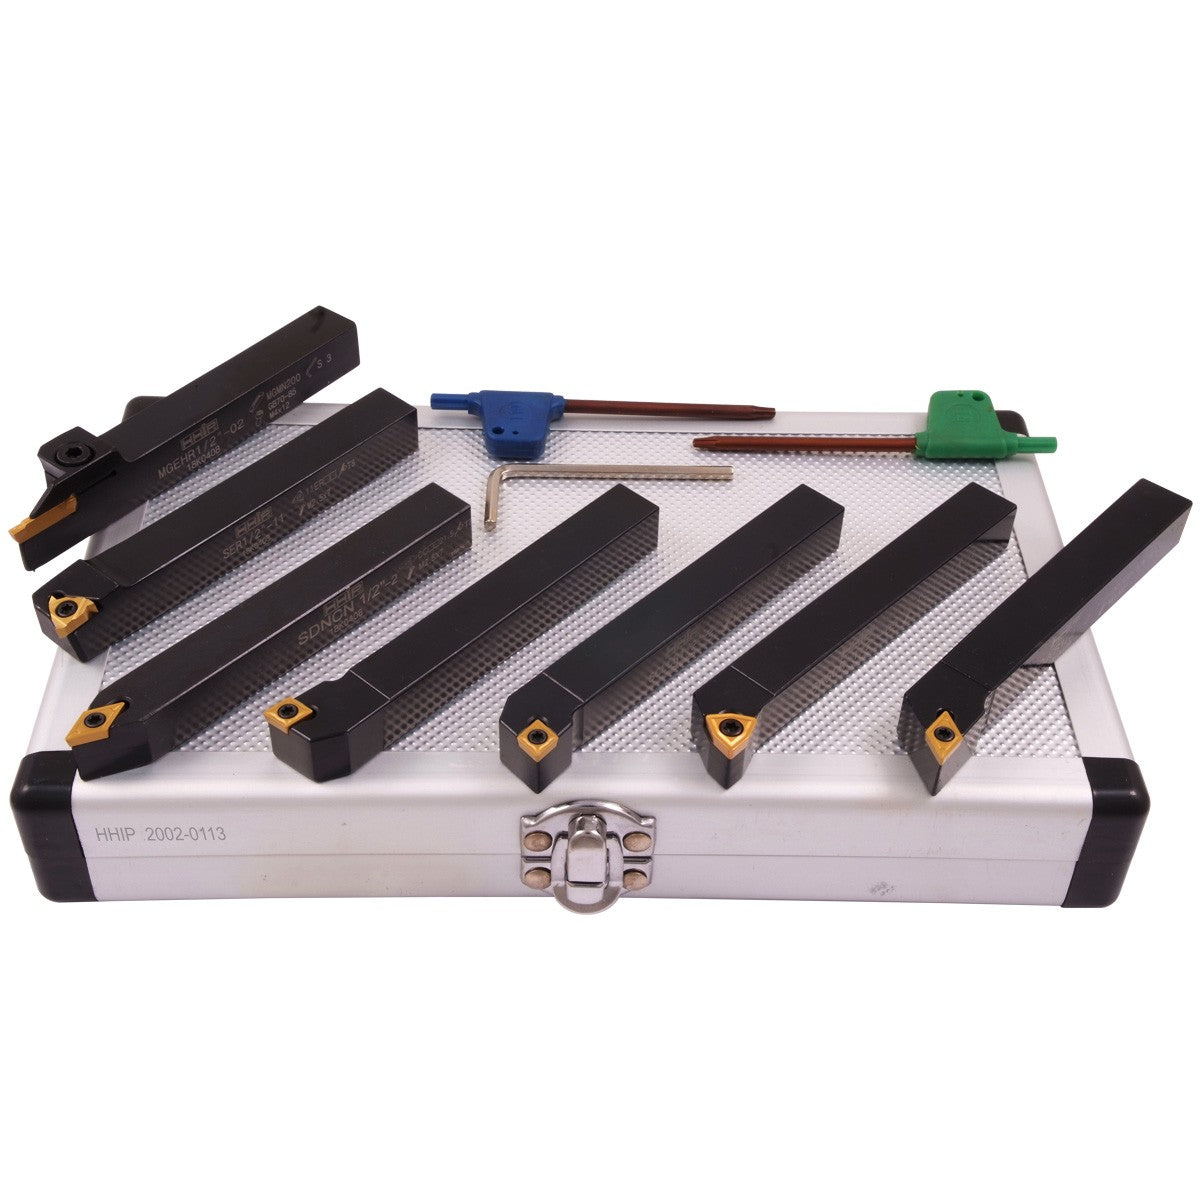 PRO-SERIES 7 PIECE 1/2 INDEXABLE CUT OFF & TURNING TOOL SET